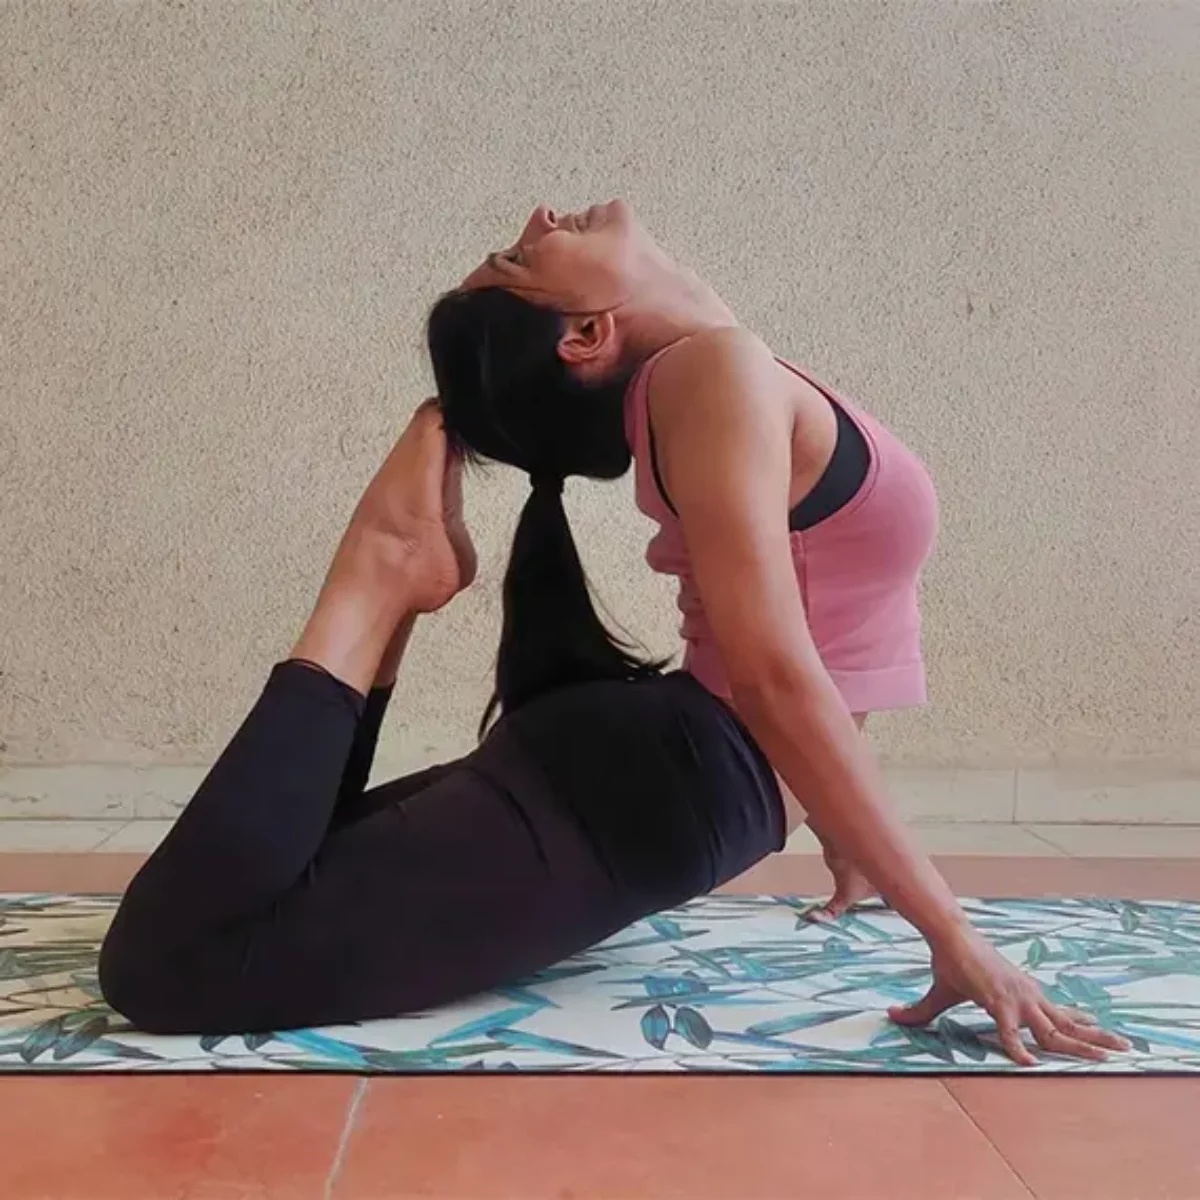 Yoga On The Move:5 Easy Seated Asana Poses For You To Try On Your Next